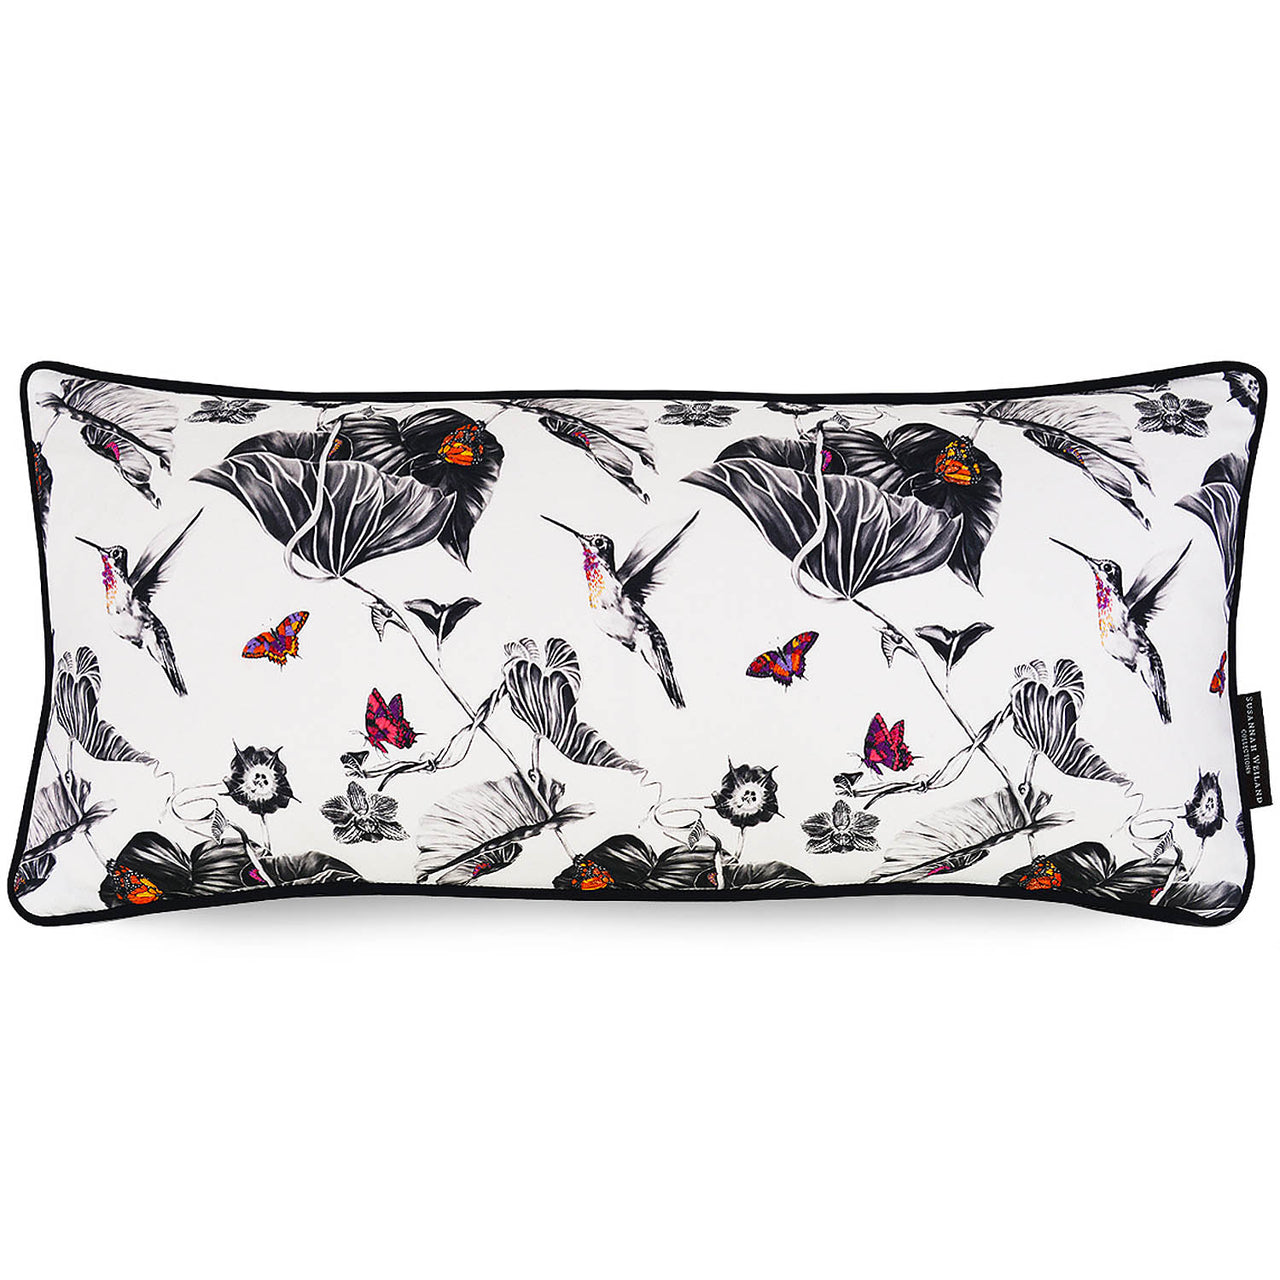 Hummingbirds and Butterflies Hand Embroidered Bolster Cushion